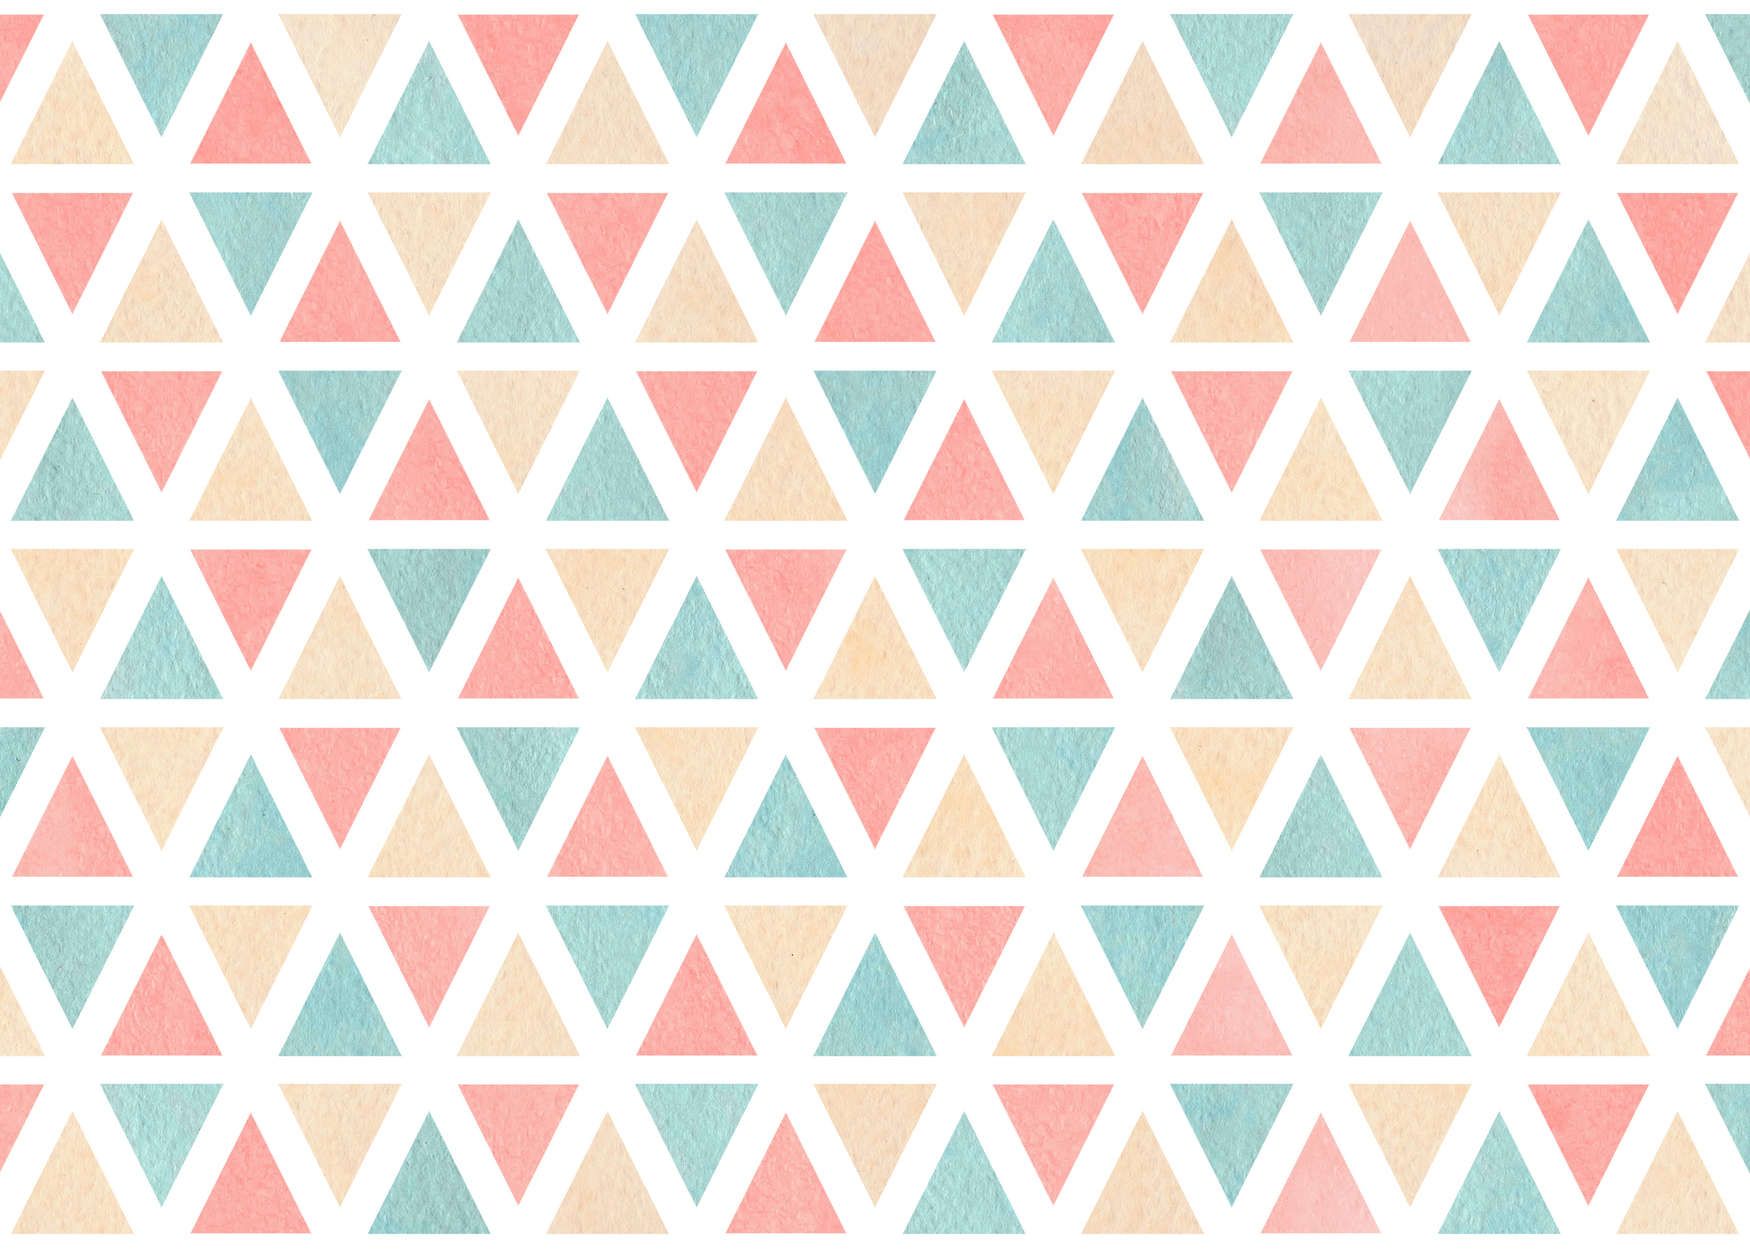             Photo wallpaper graphic pattern with colourful triangles - textured non-woven
        